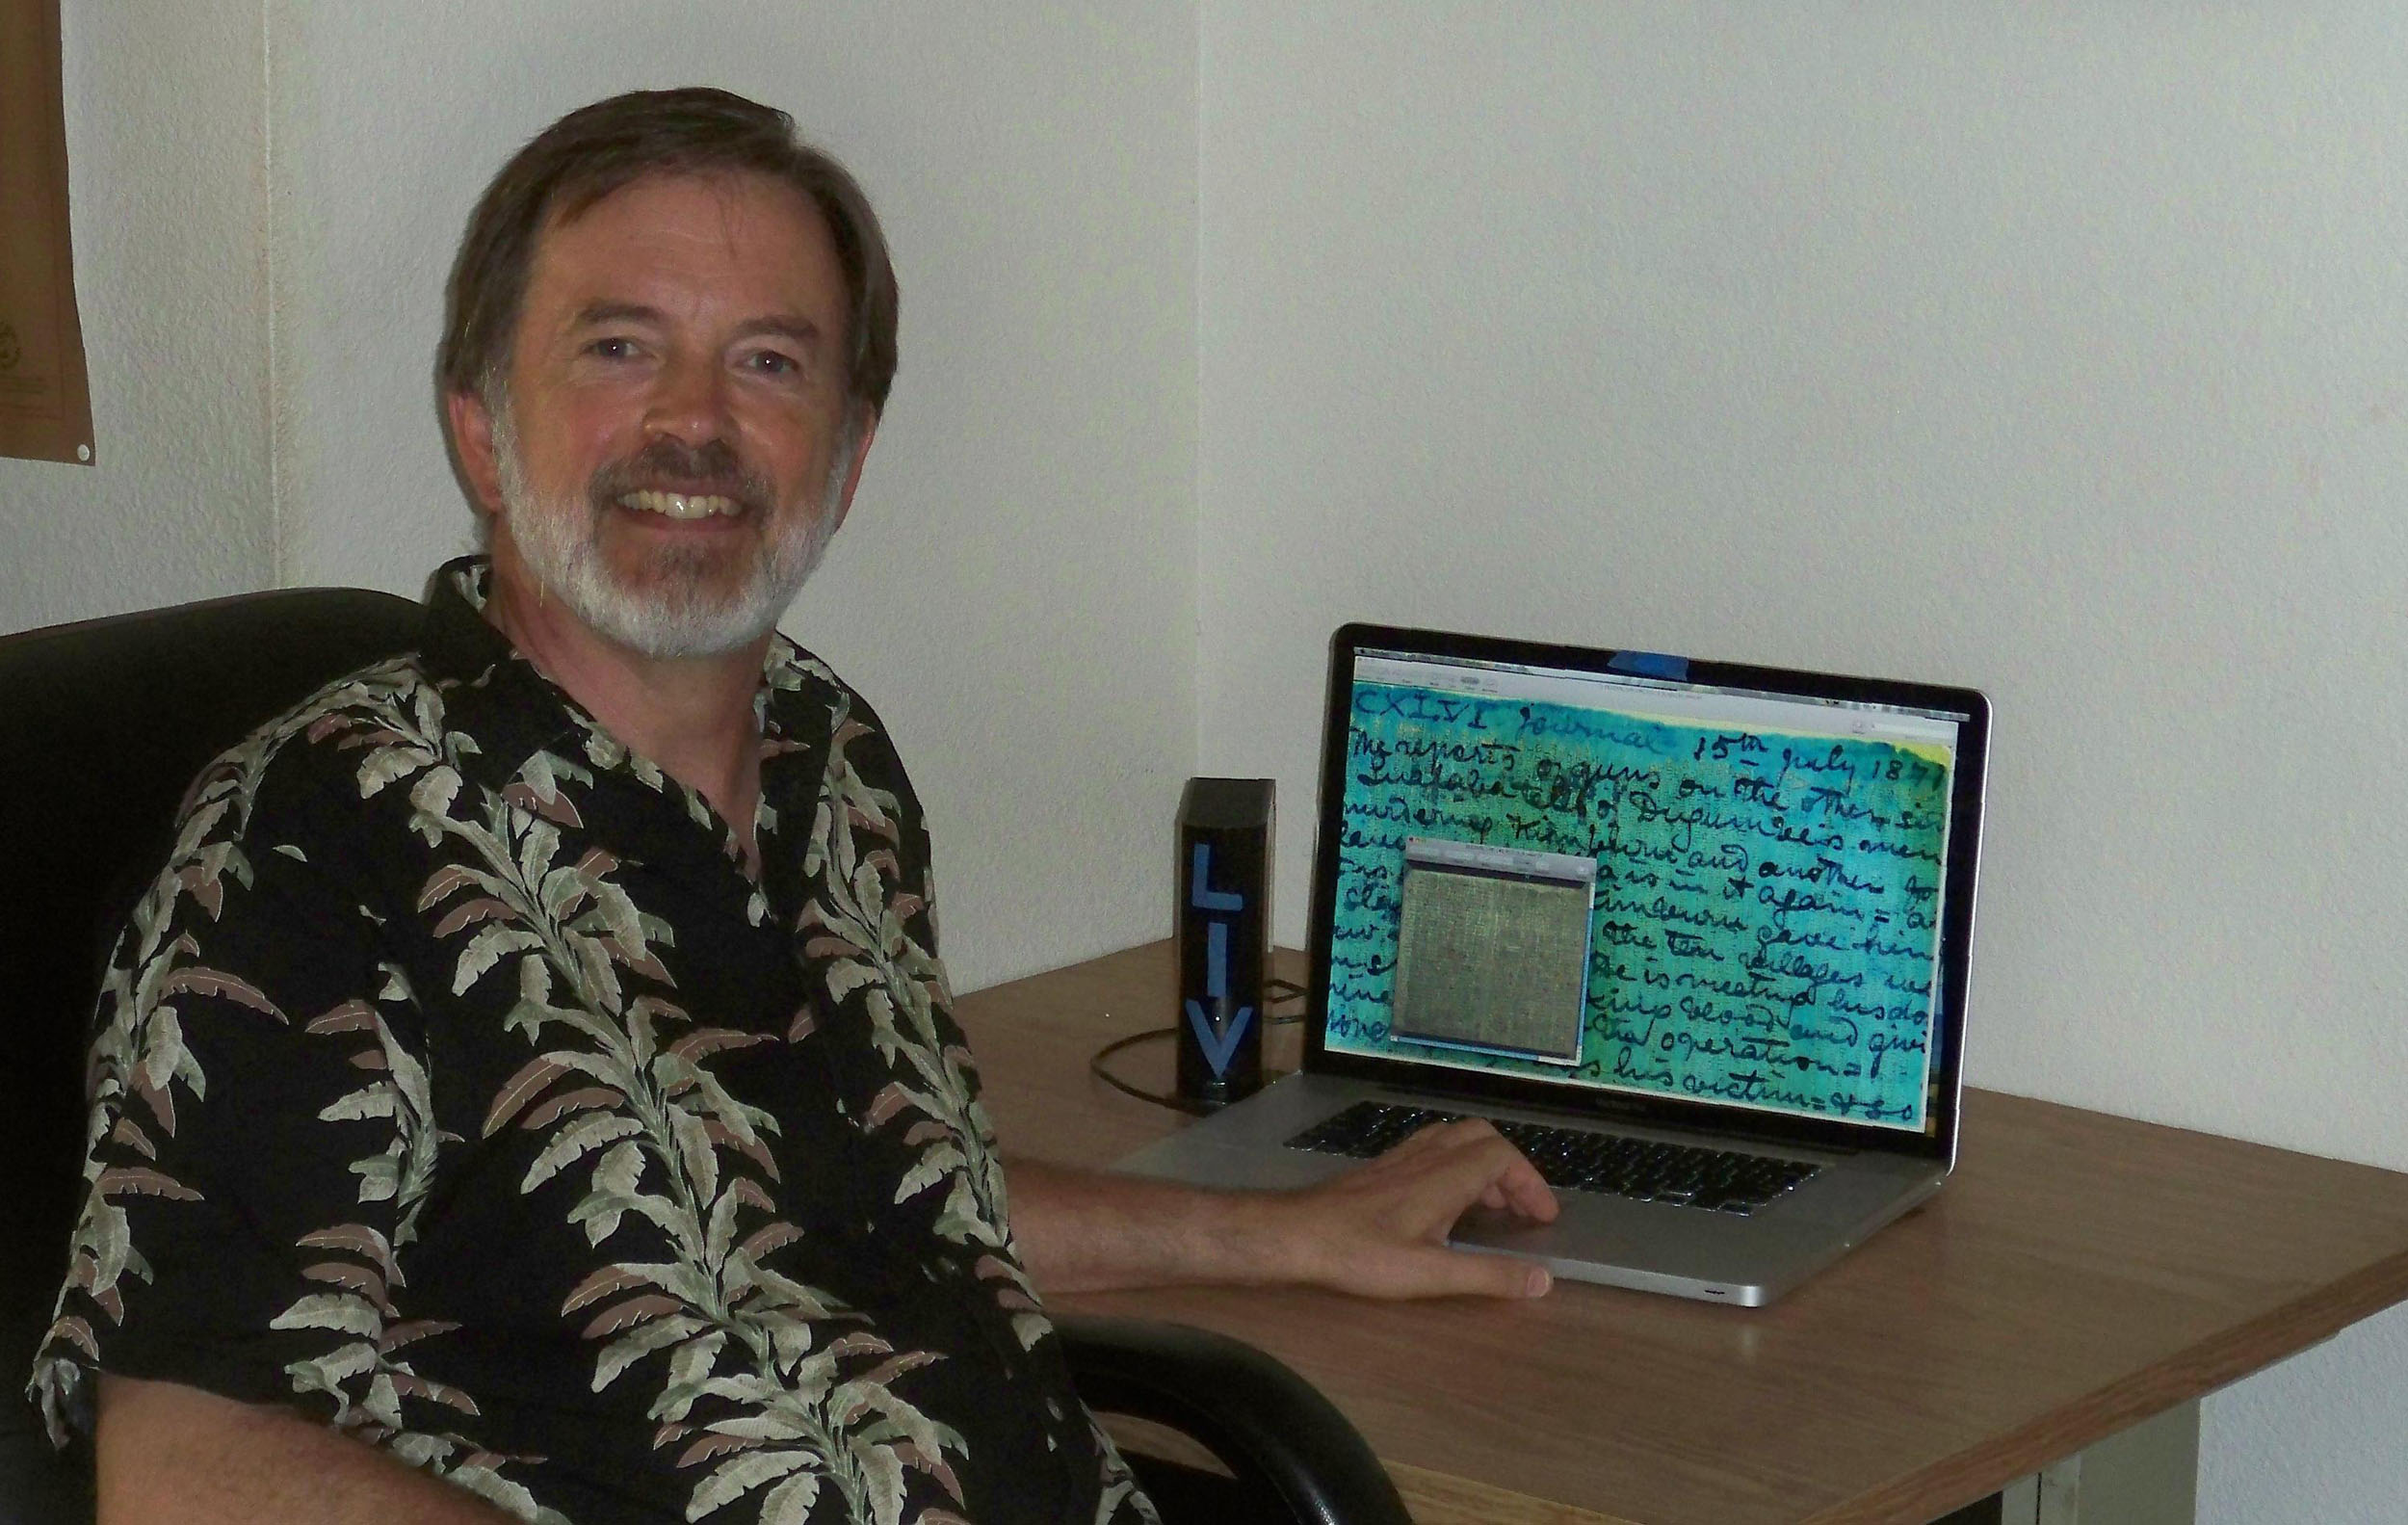 Keith Knox after a breakthrough in processing the spectral images the 1871 Field Diary in Maui, Hawaii, 2010. Copyright Livingstone Spectral Imaging Project team. Creative Commons Attribution-NonCommercial 3.0 Unported (https://creativecommons.org/licenses/by-nc/3.0/).